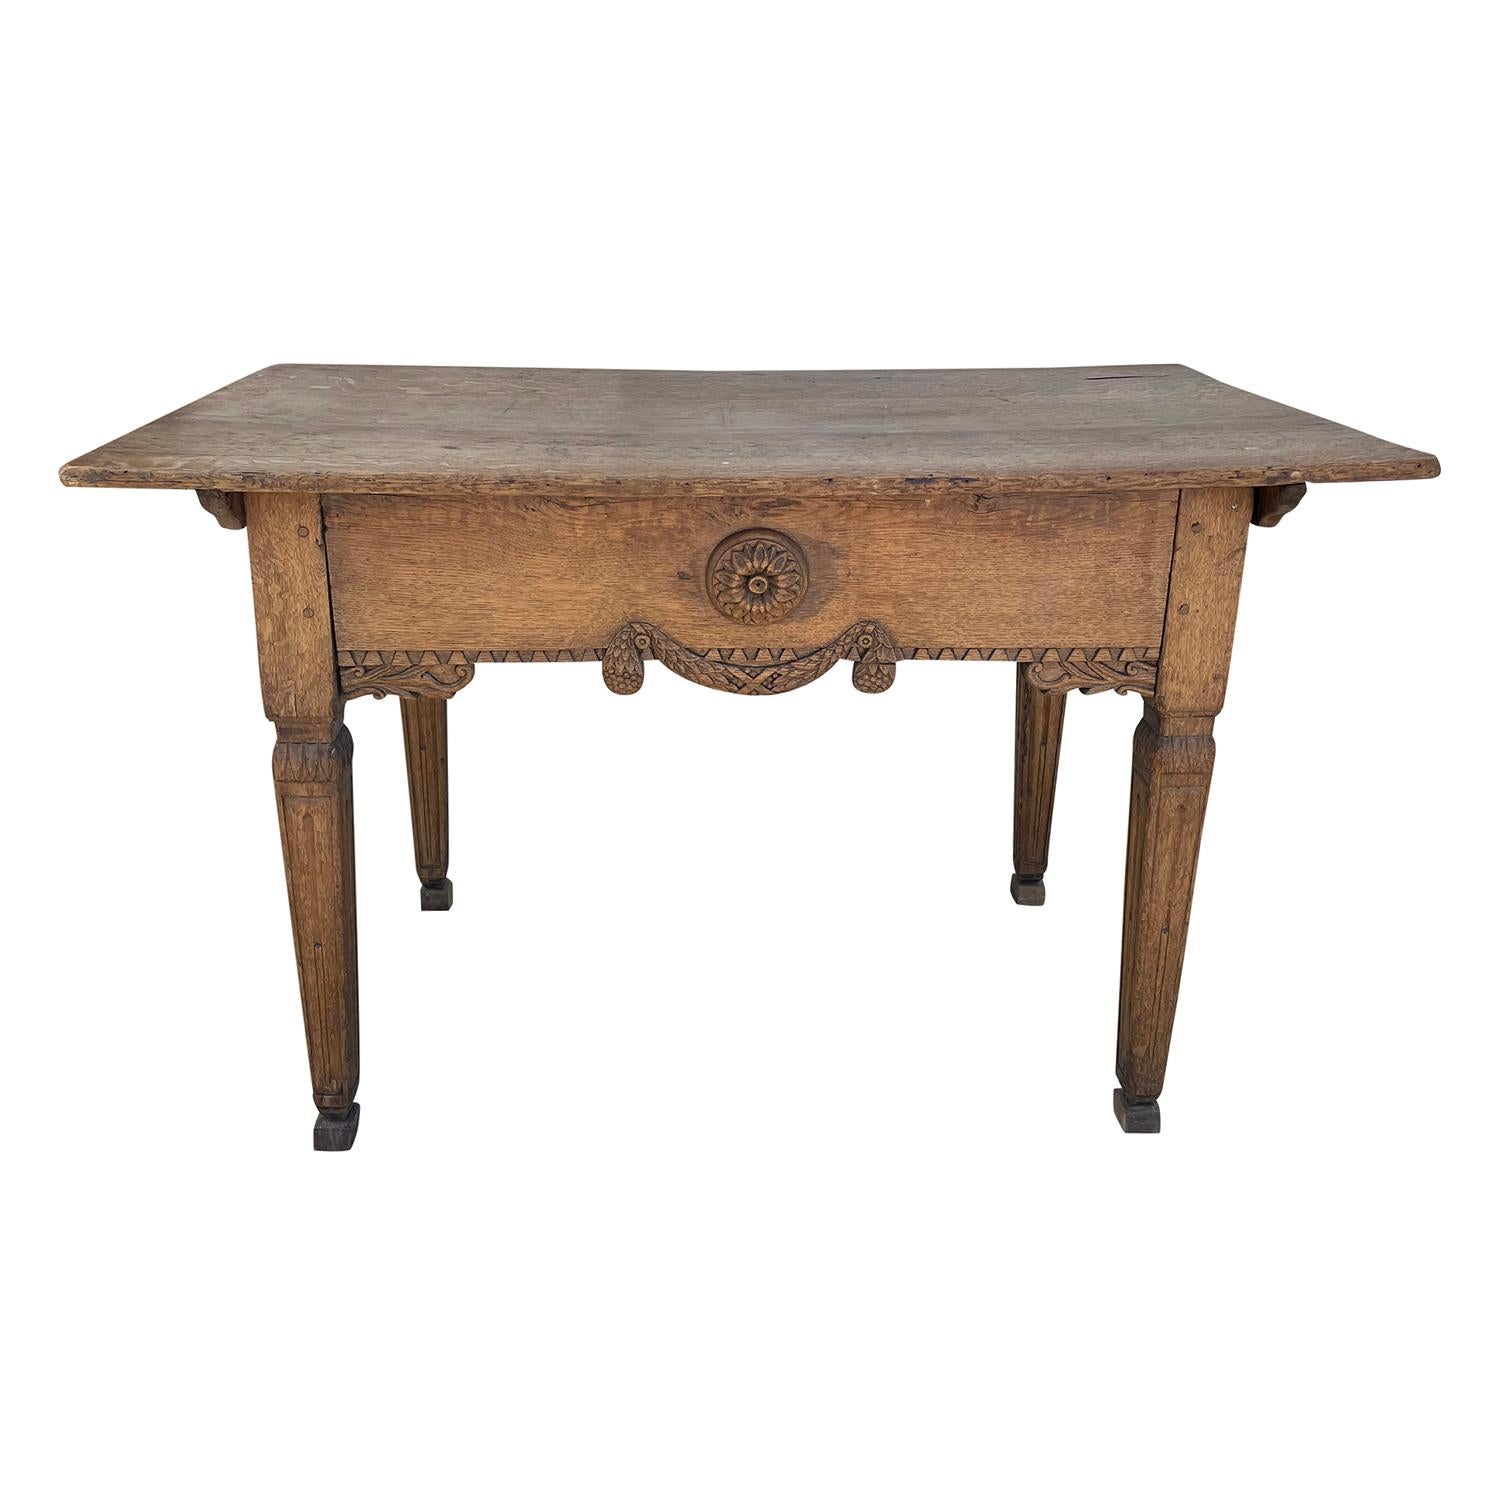 An antique French Régence console, farm table with an apron, made of hand crafted Oakwood in good condition. The end, side table has four straight, tapered wooden legs, enhanced by detailed wood carvings. The table is consisting its original metal